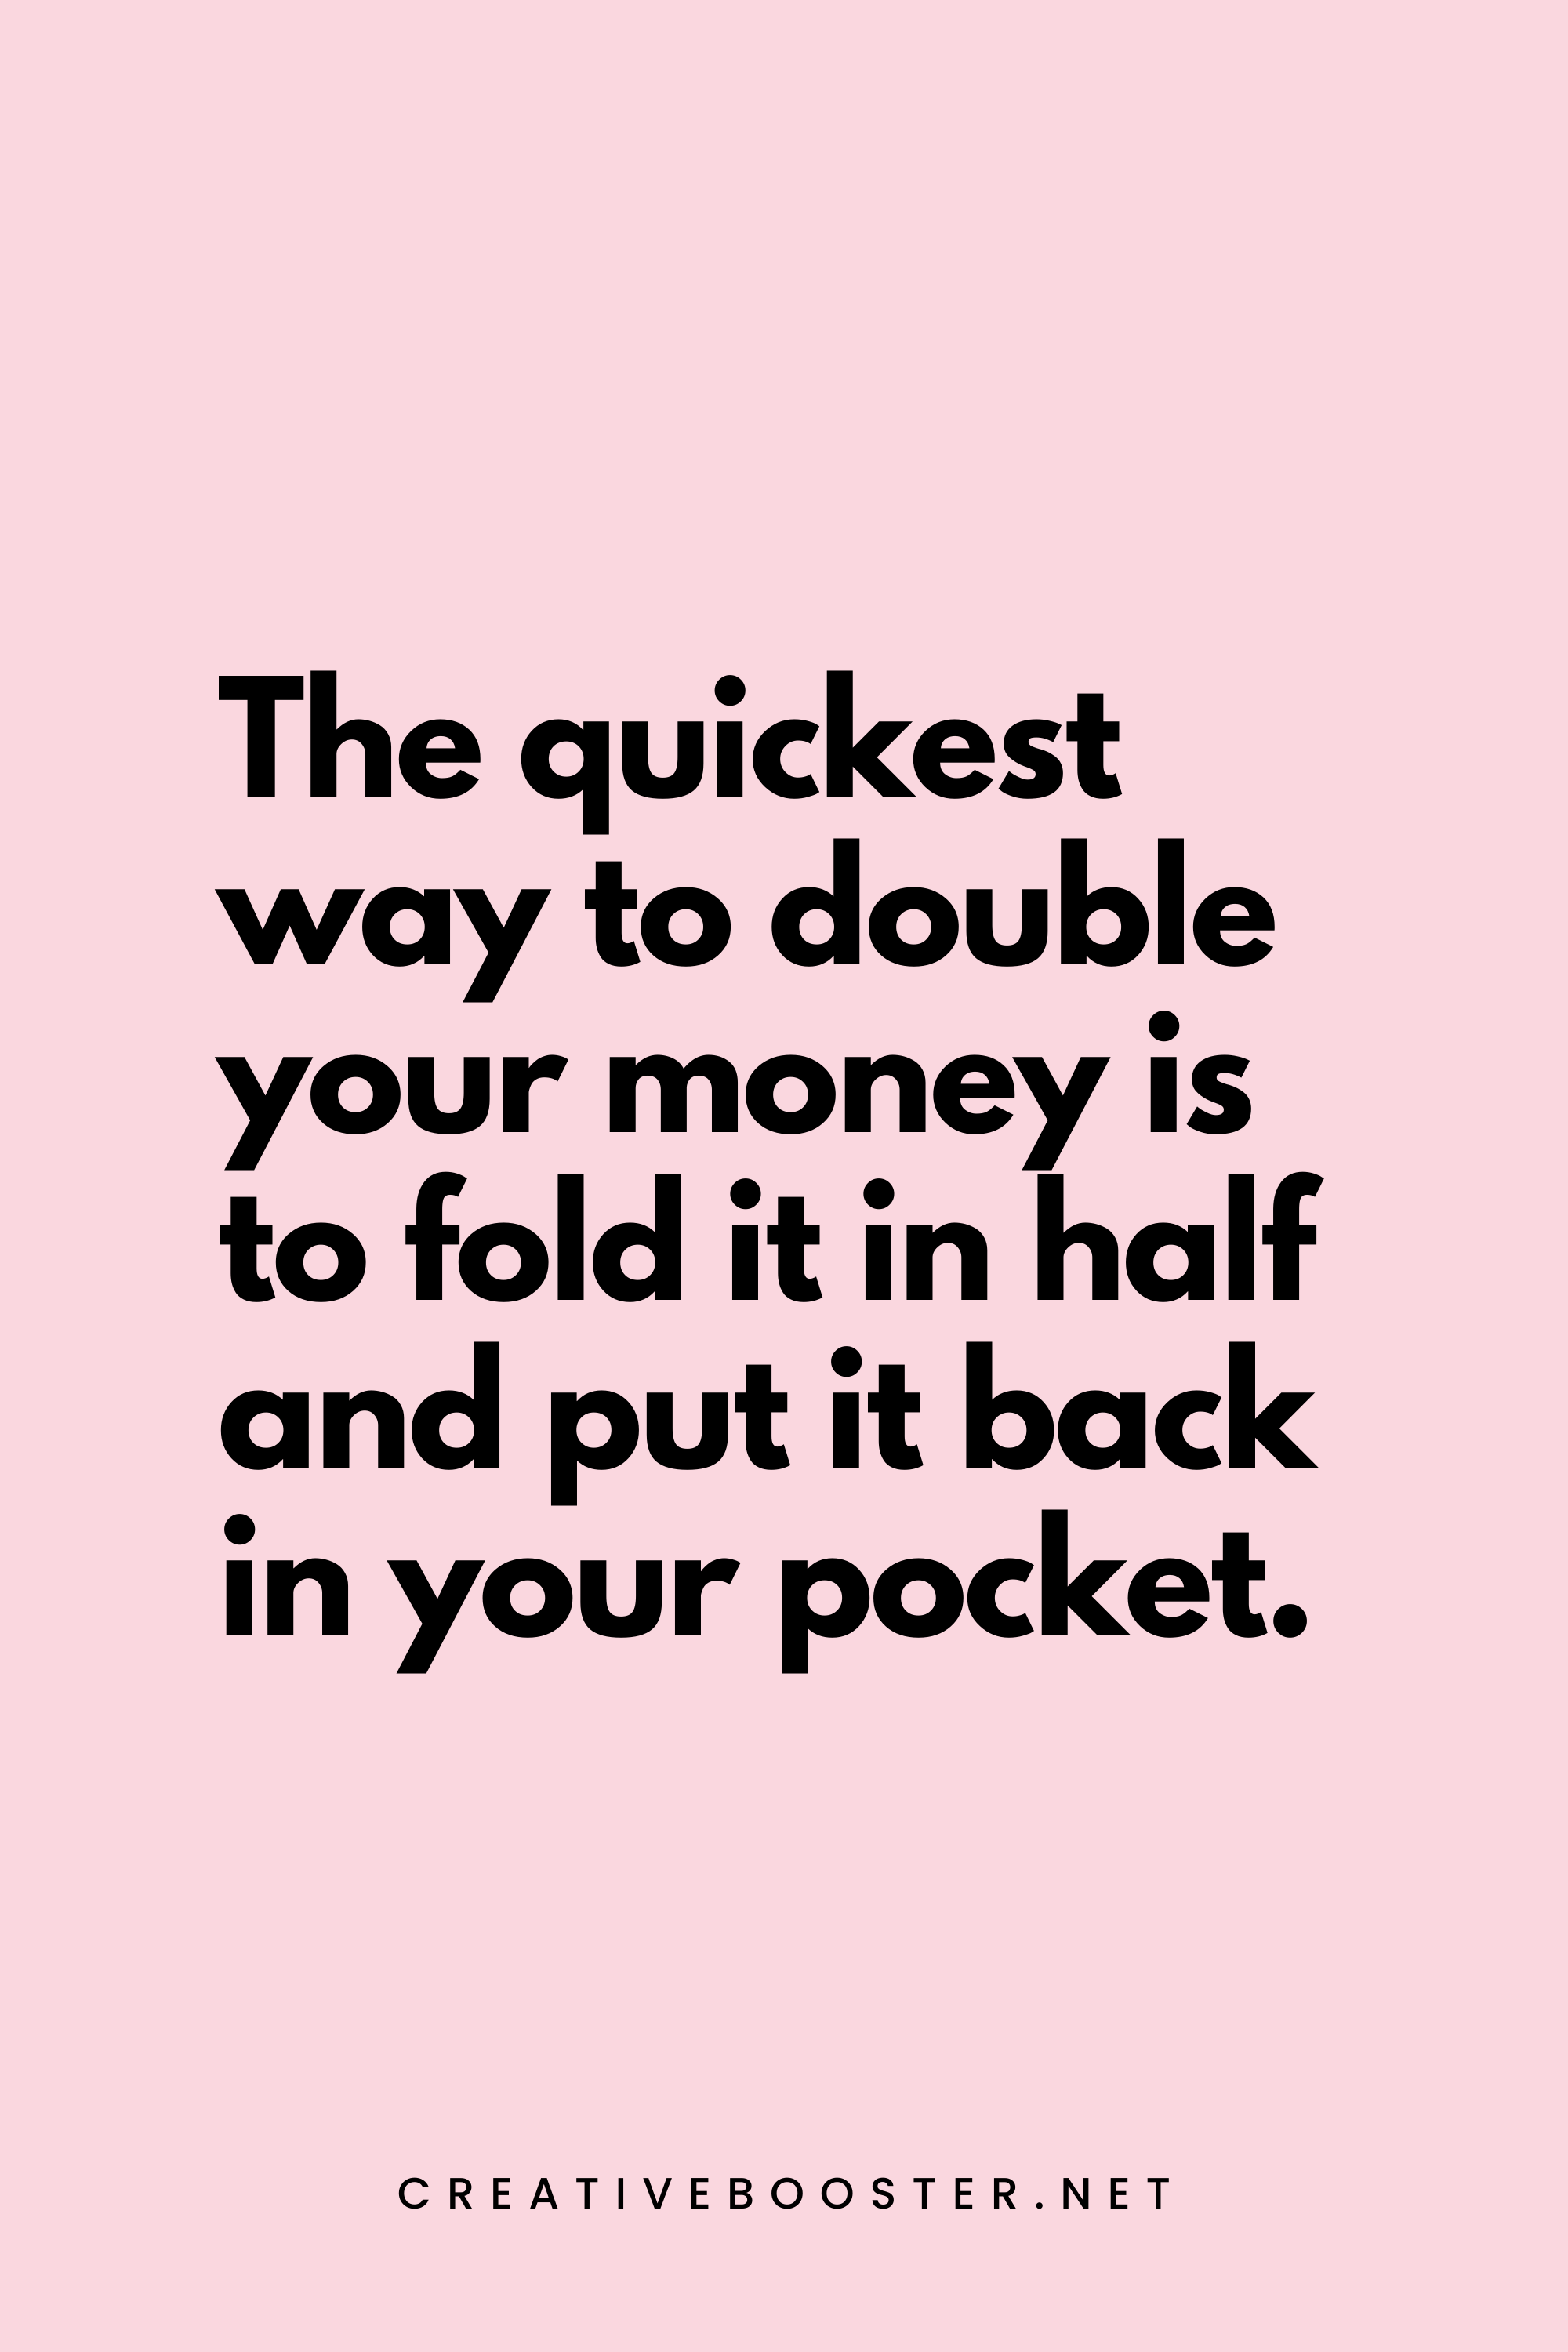 35. The quickest way to double your money is to fold it in half and put it back in your pocket. - Unknown - 3. Financial Freedom Quotes for Students